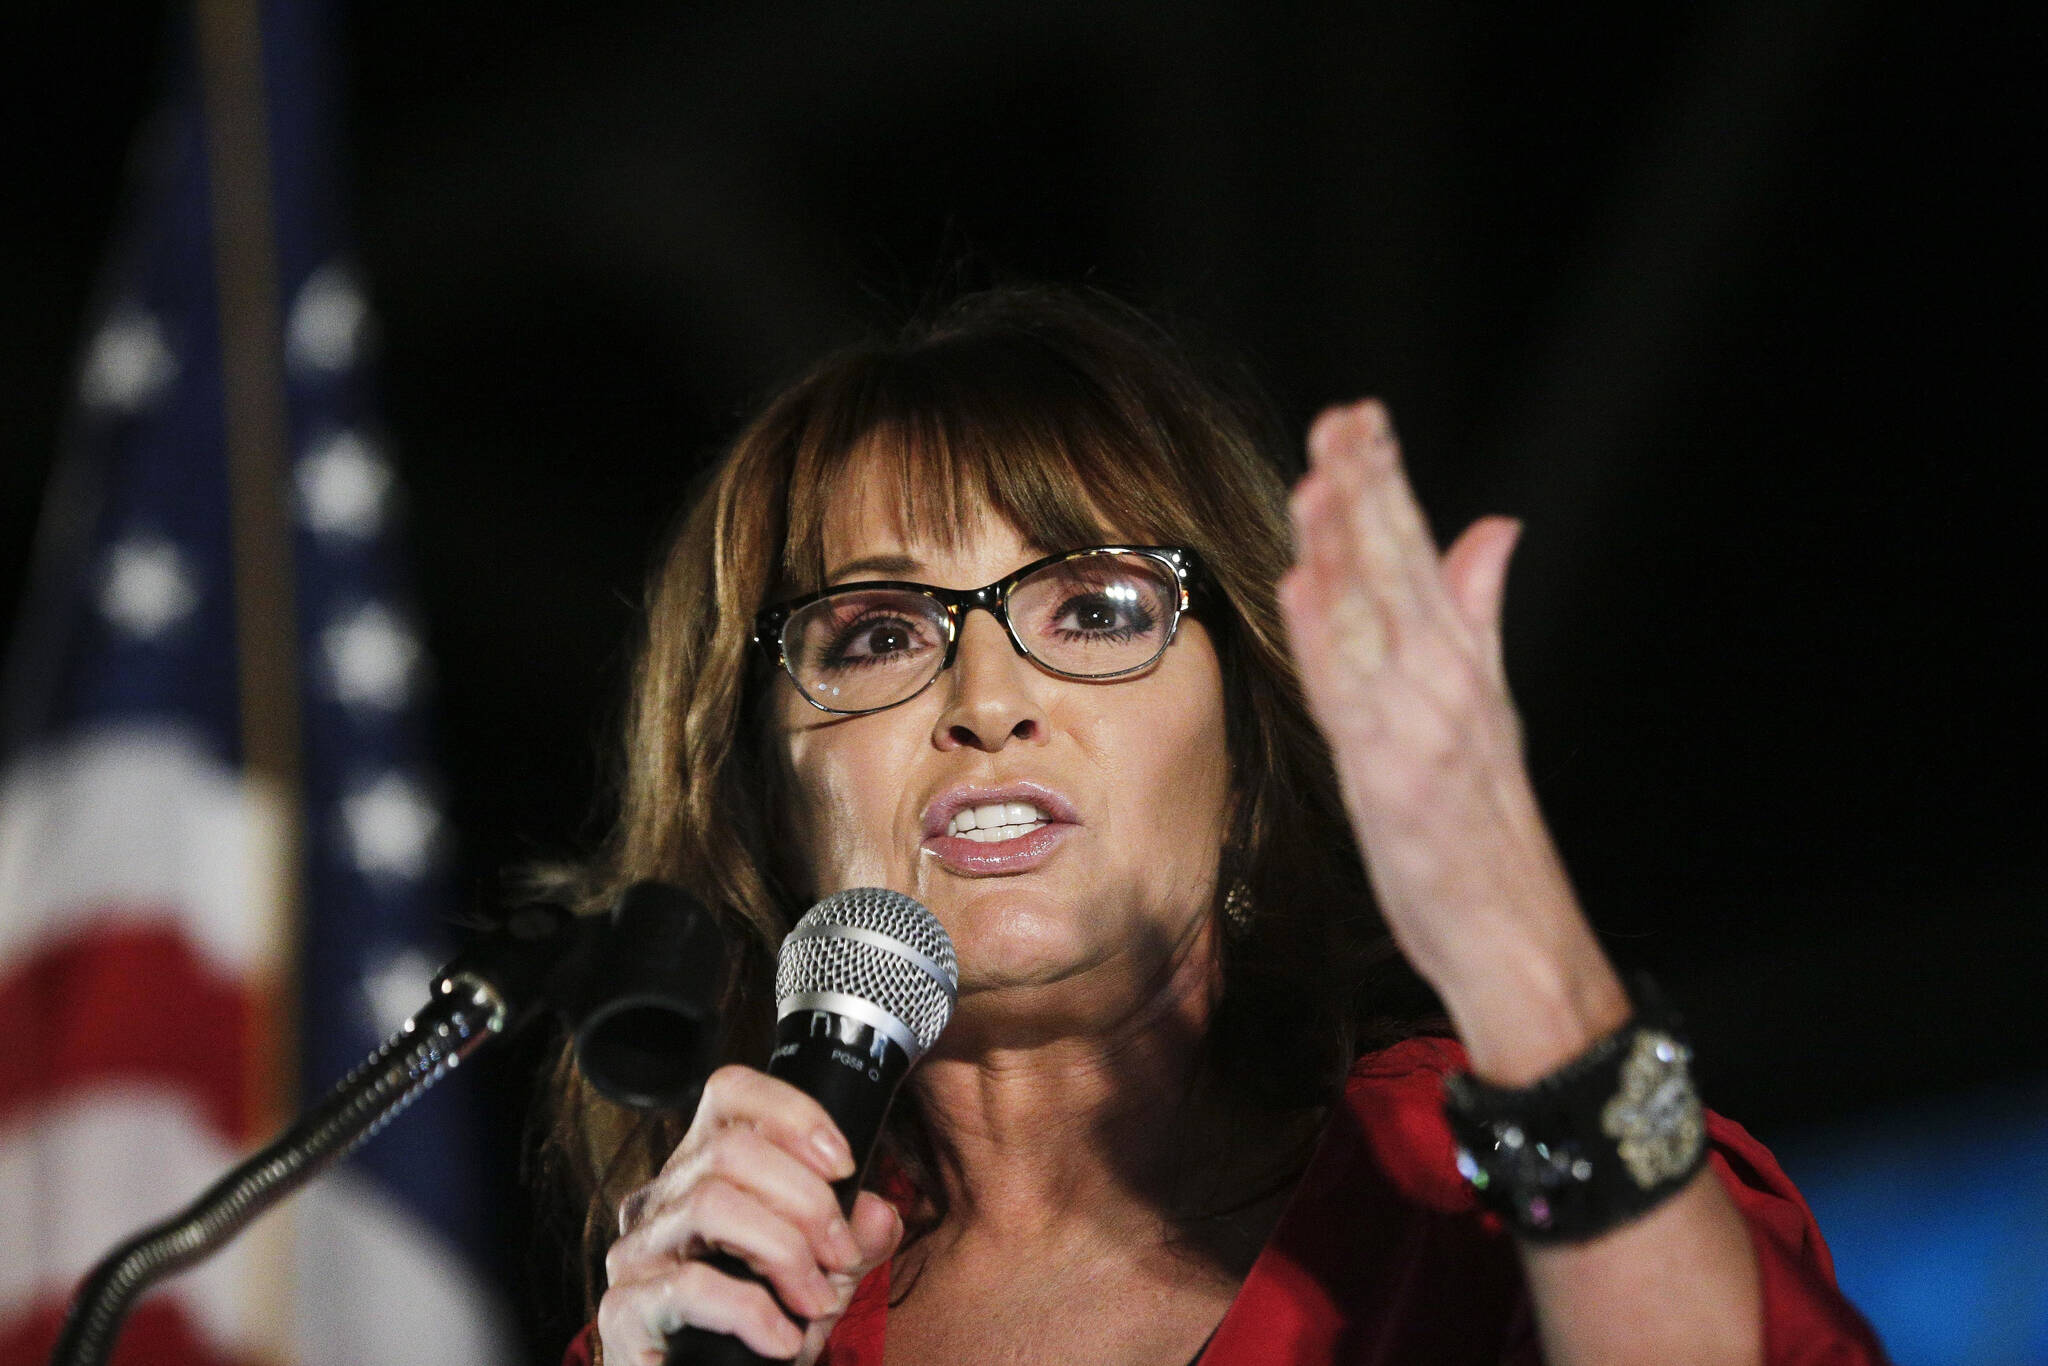 AP Photo / Brynn Anderson
Then-vice presidential candidate Sarah Palin speaks at a rally in Montgomery, Ala., in 2017.